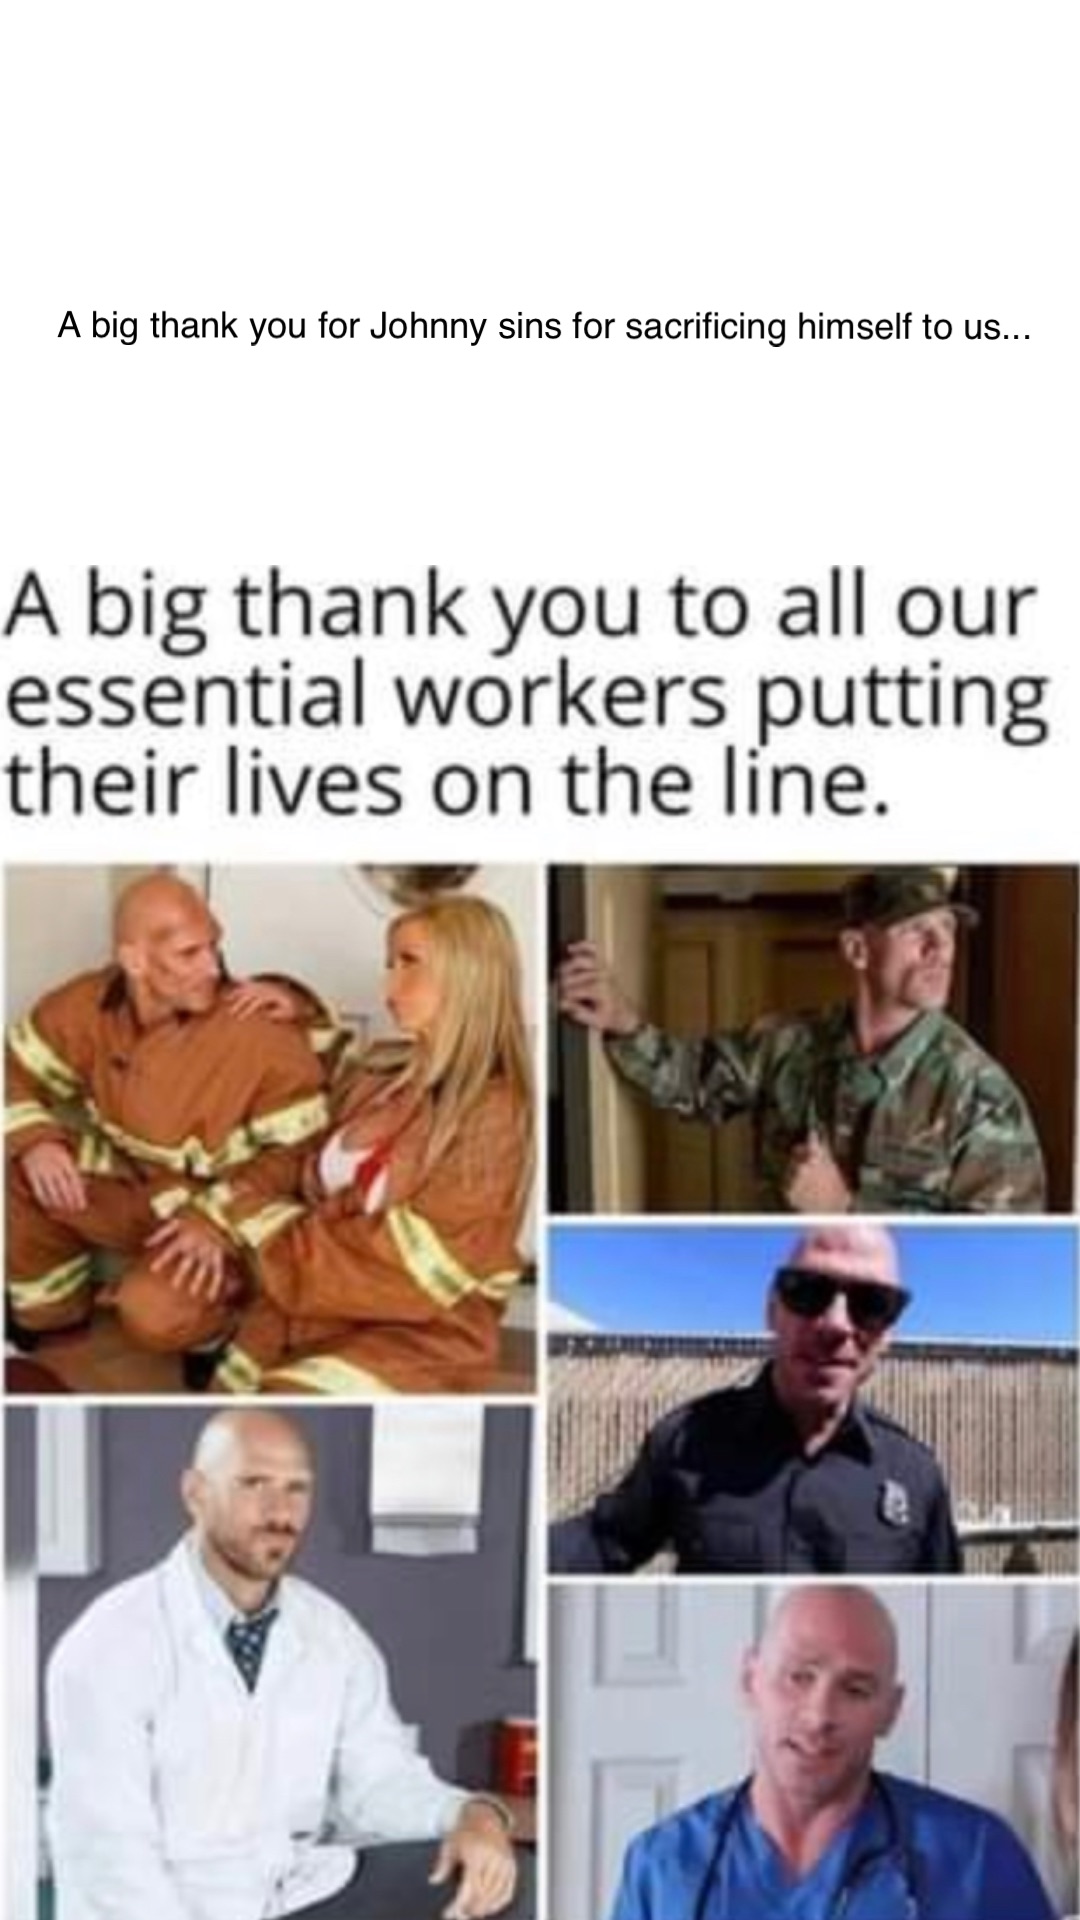 A big thank you for Johnny sins for sacrificing himself to us...